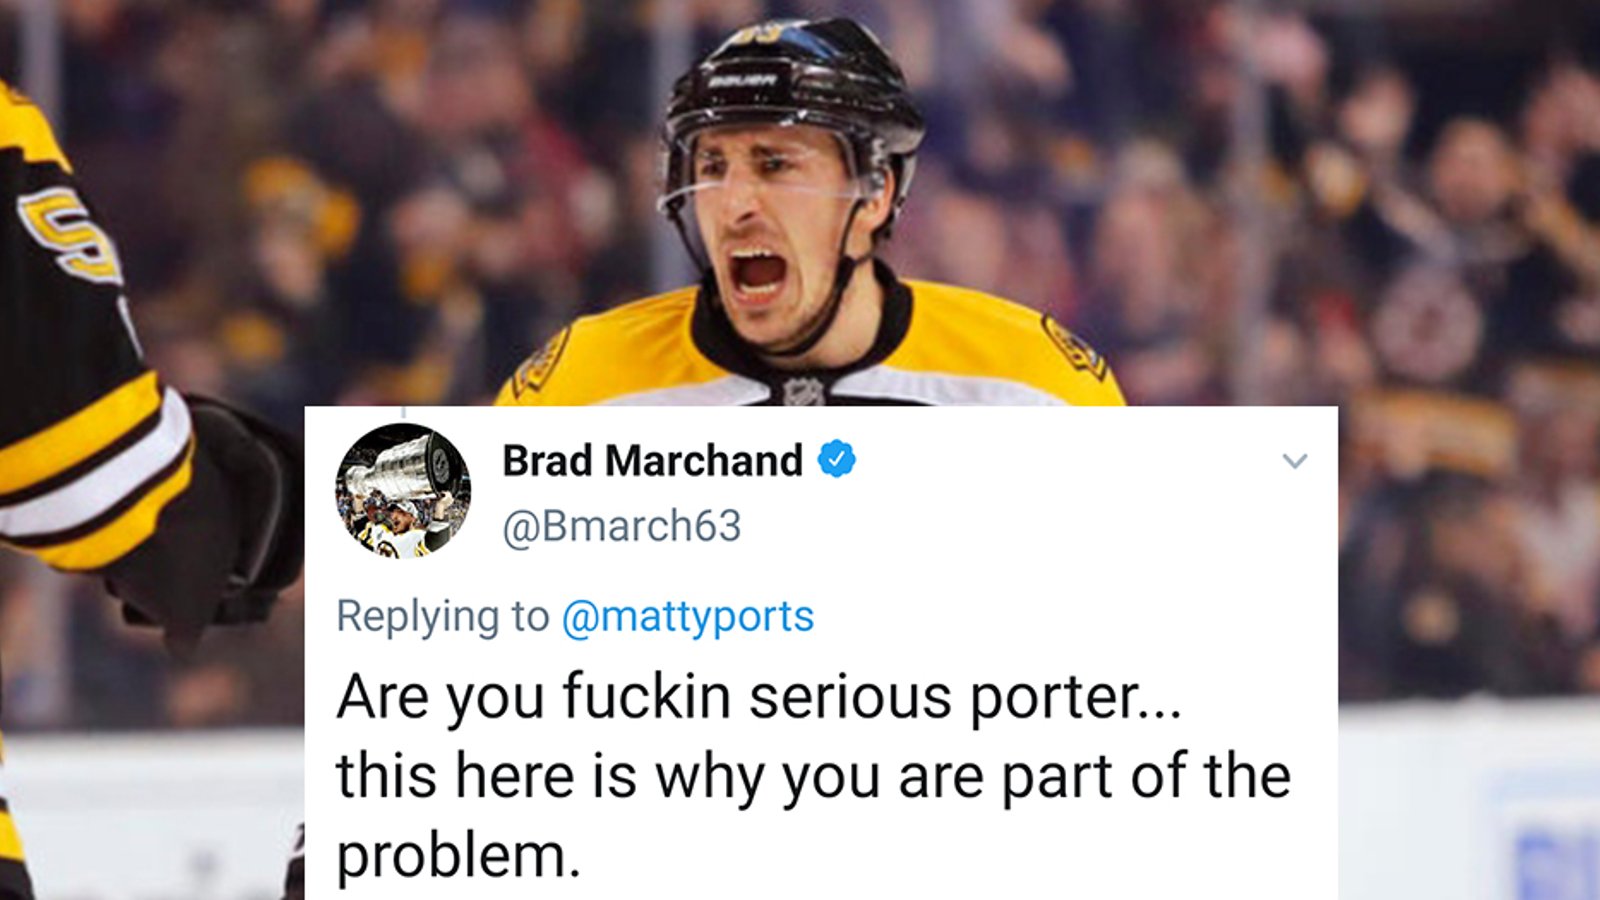 Marchand rips into media calls them out as “part of the problem” in defending teammate Tuukka Rask